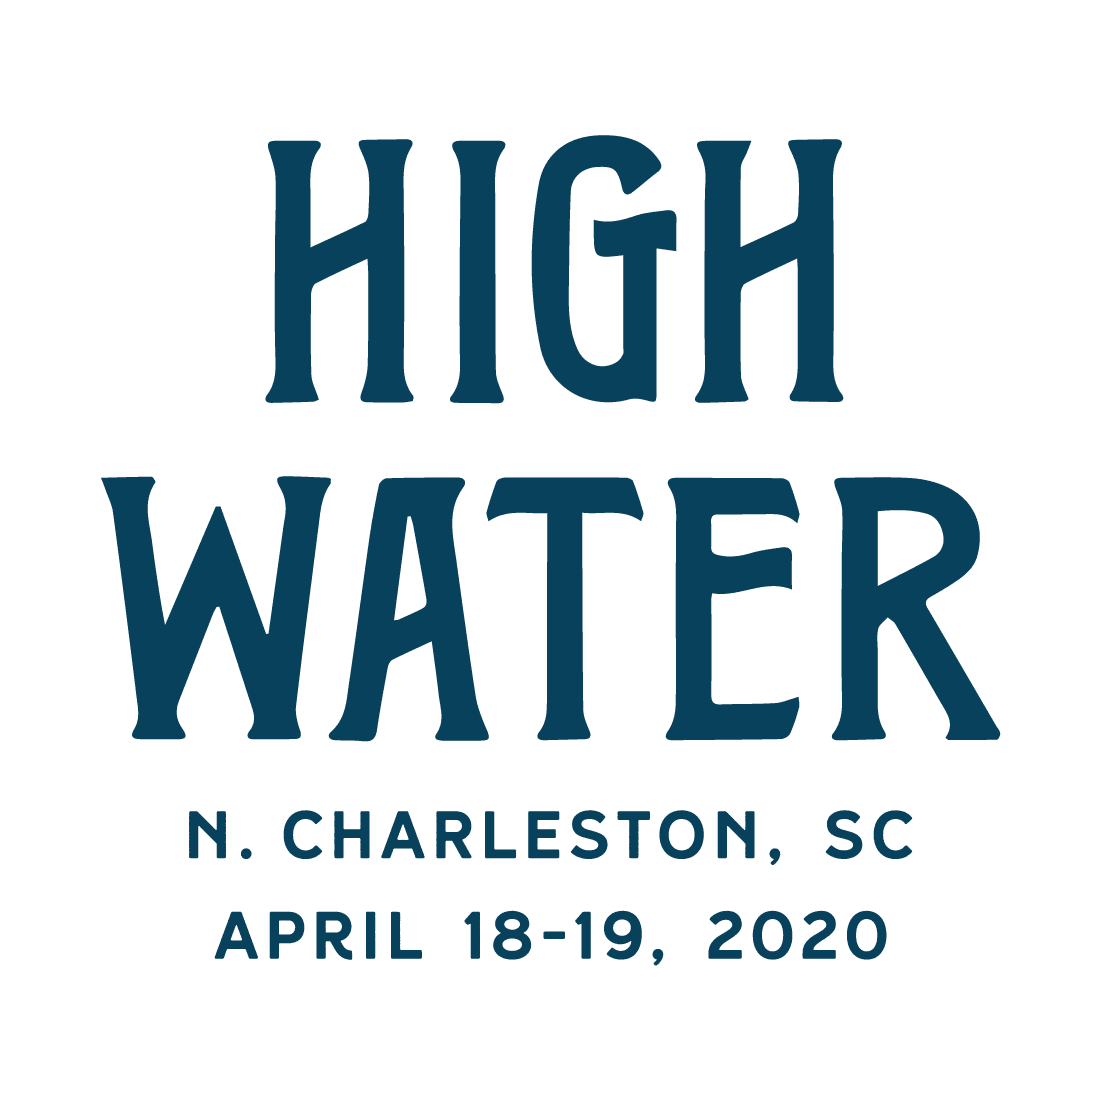 High Water 2020 lineup announced: Wilco, Nathaniel Ratleliff, more to perform